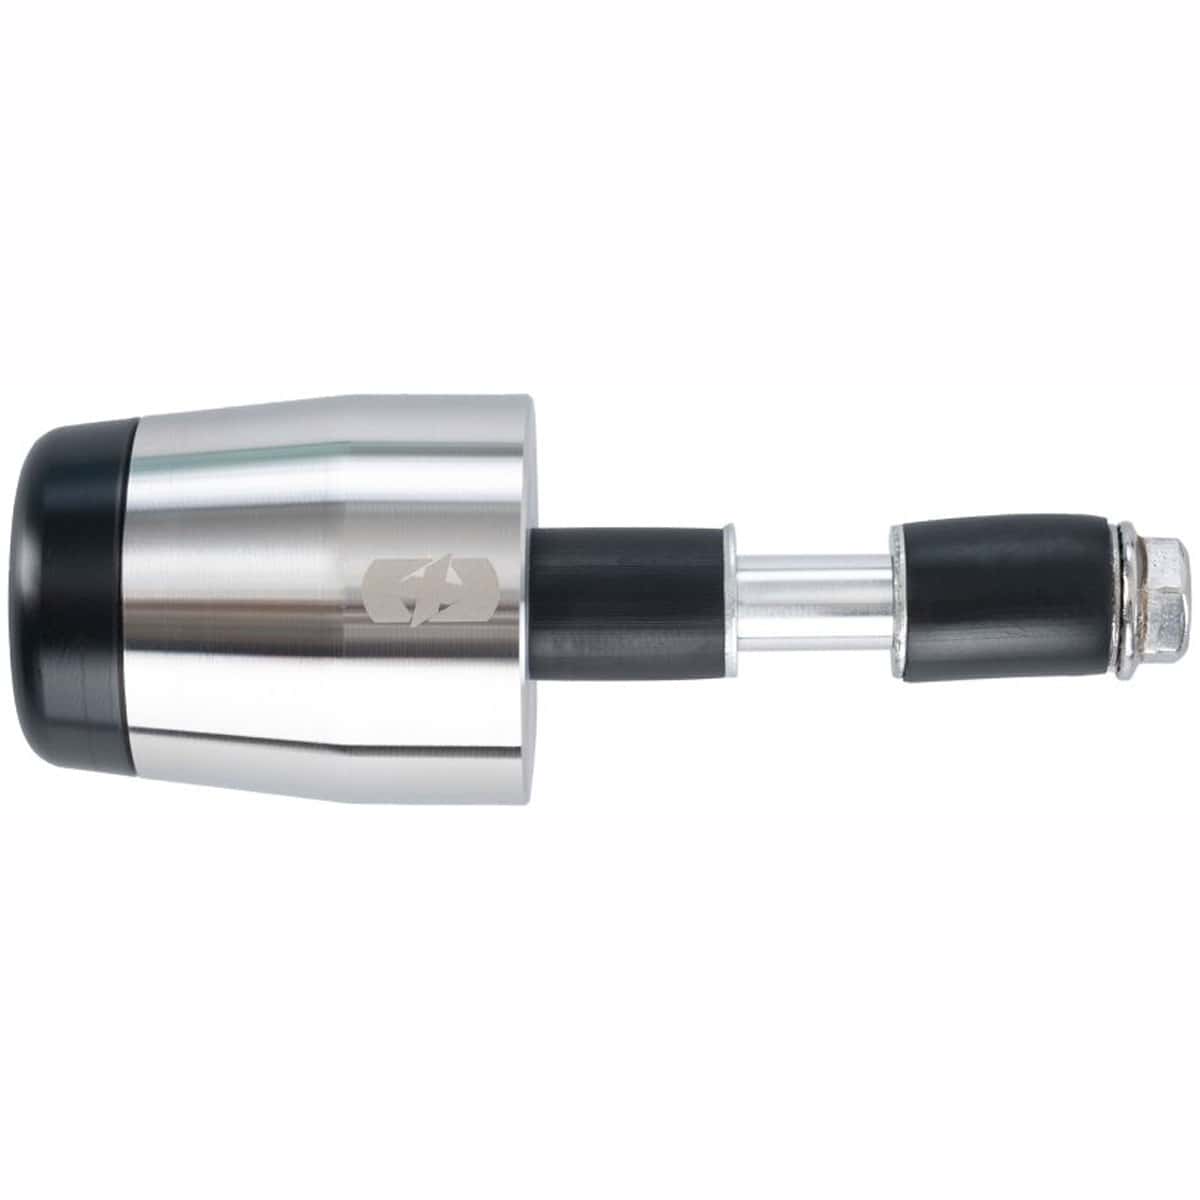 Oxford Bar Weights Stainless Steel 240g SS240: Reduce vibrations to make riding more comfortable